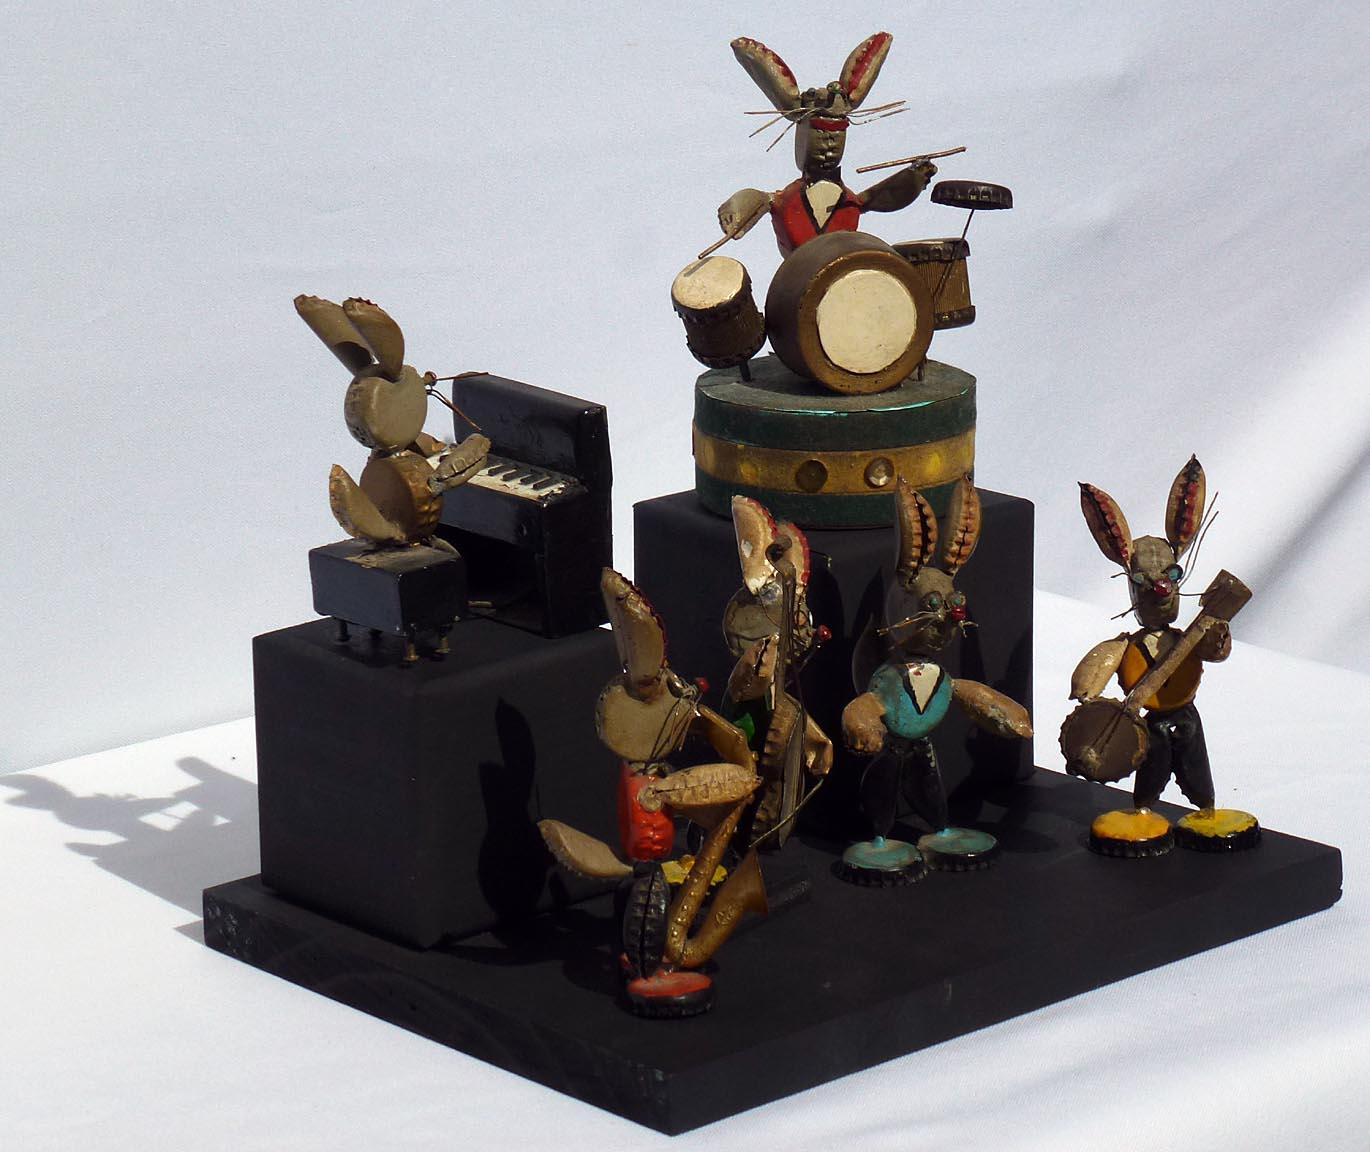 This is a wonderfully folky set of rabbit musicians made from bottle caps and found objects. There is a piano, drums, banjo, base, saxophone, and one rabbit who is singing and/or directing. The ears, tails, arms, and legs are bottle caps folded in